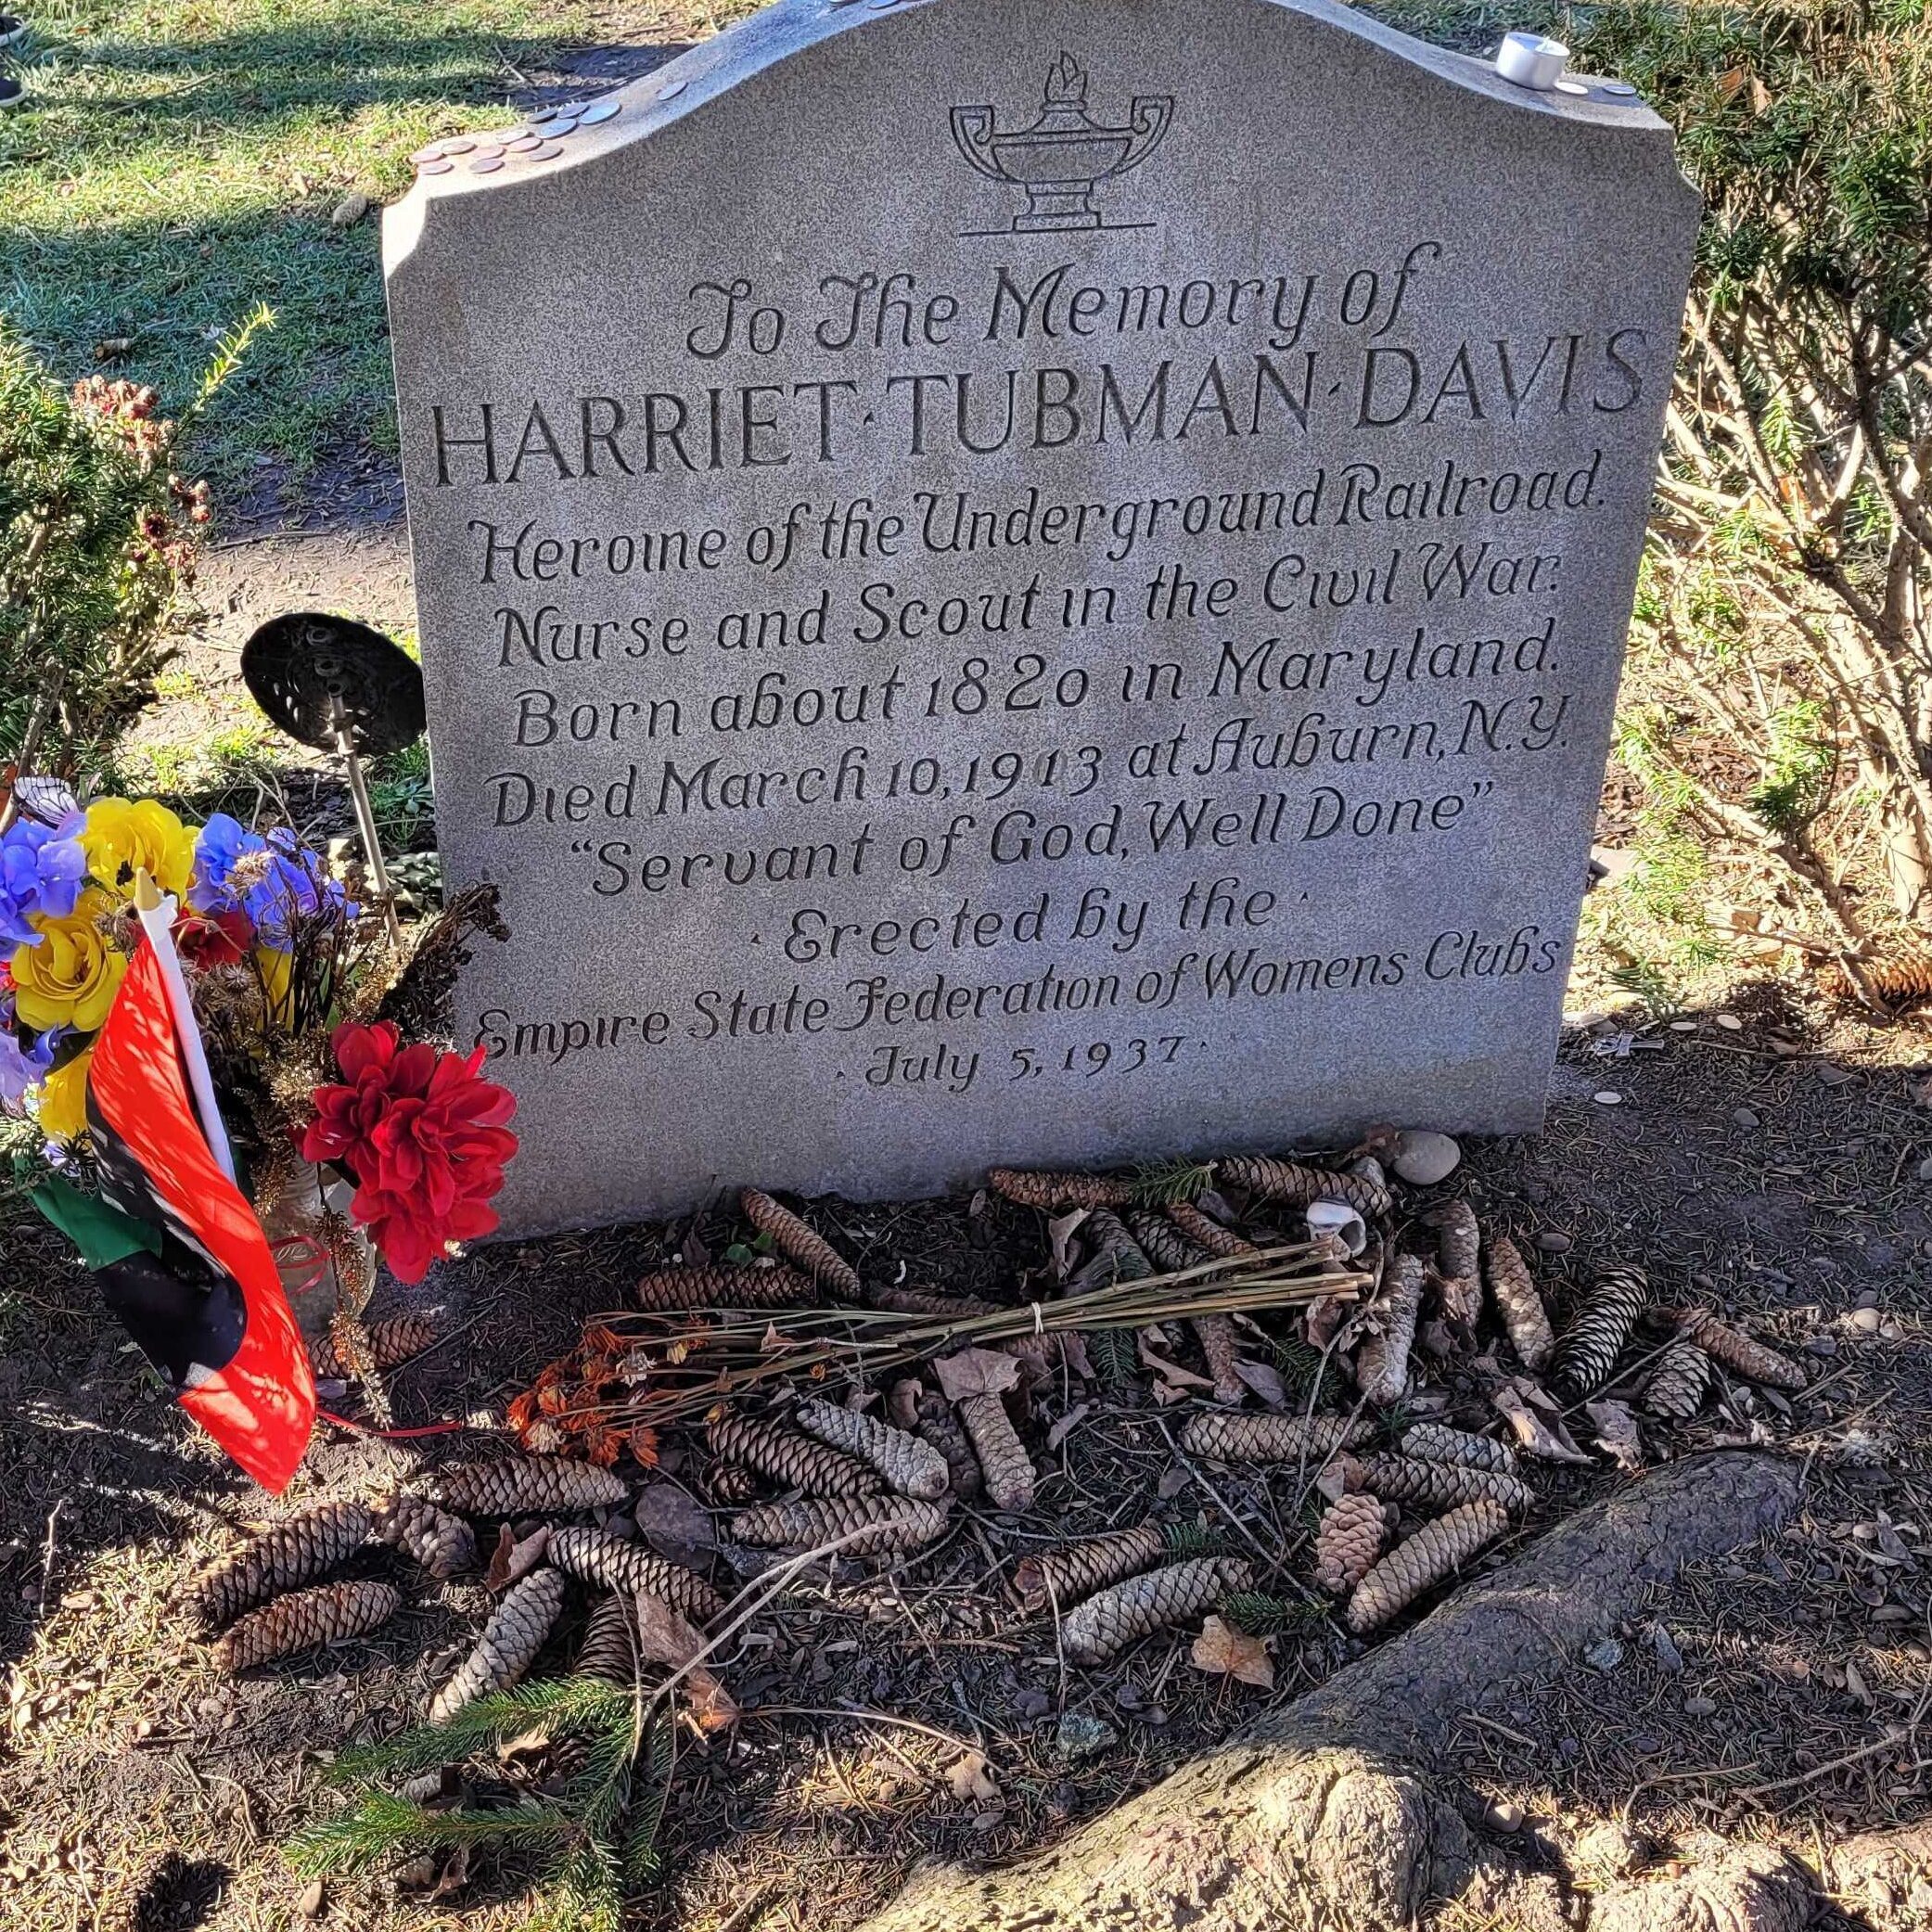 gravestone with the name Harriet Tubman Davis with memorial inscription decorated with red ribbons and flowers with pinecones at the base